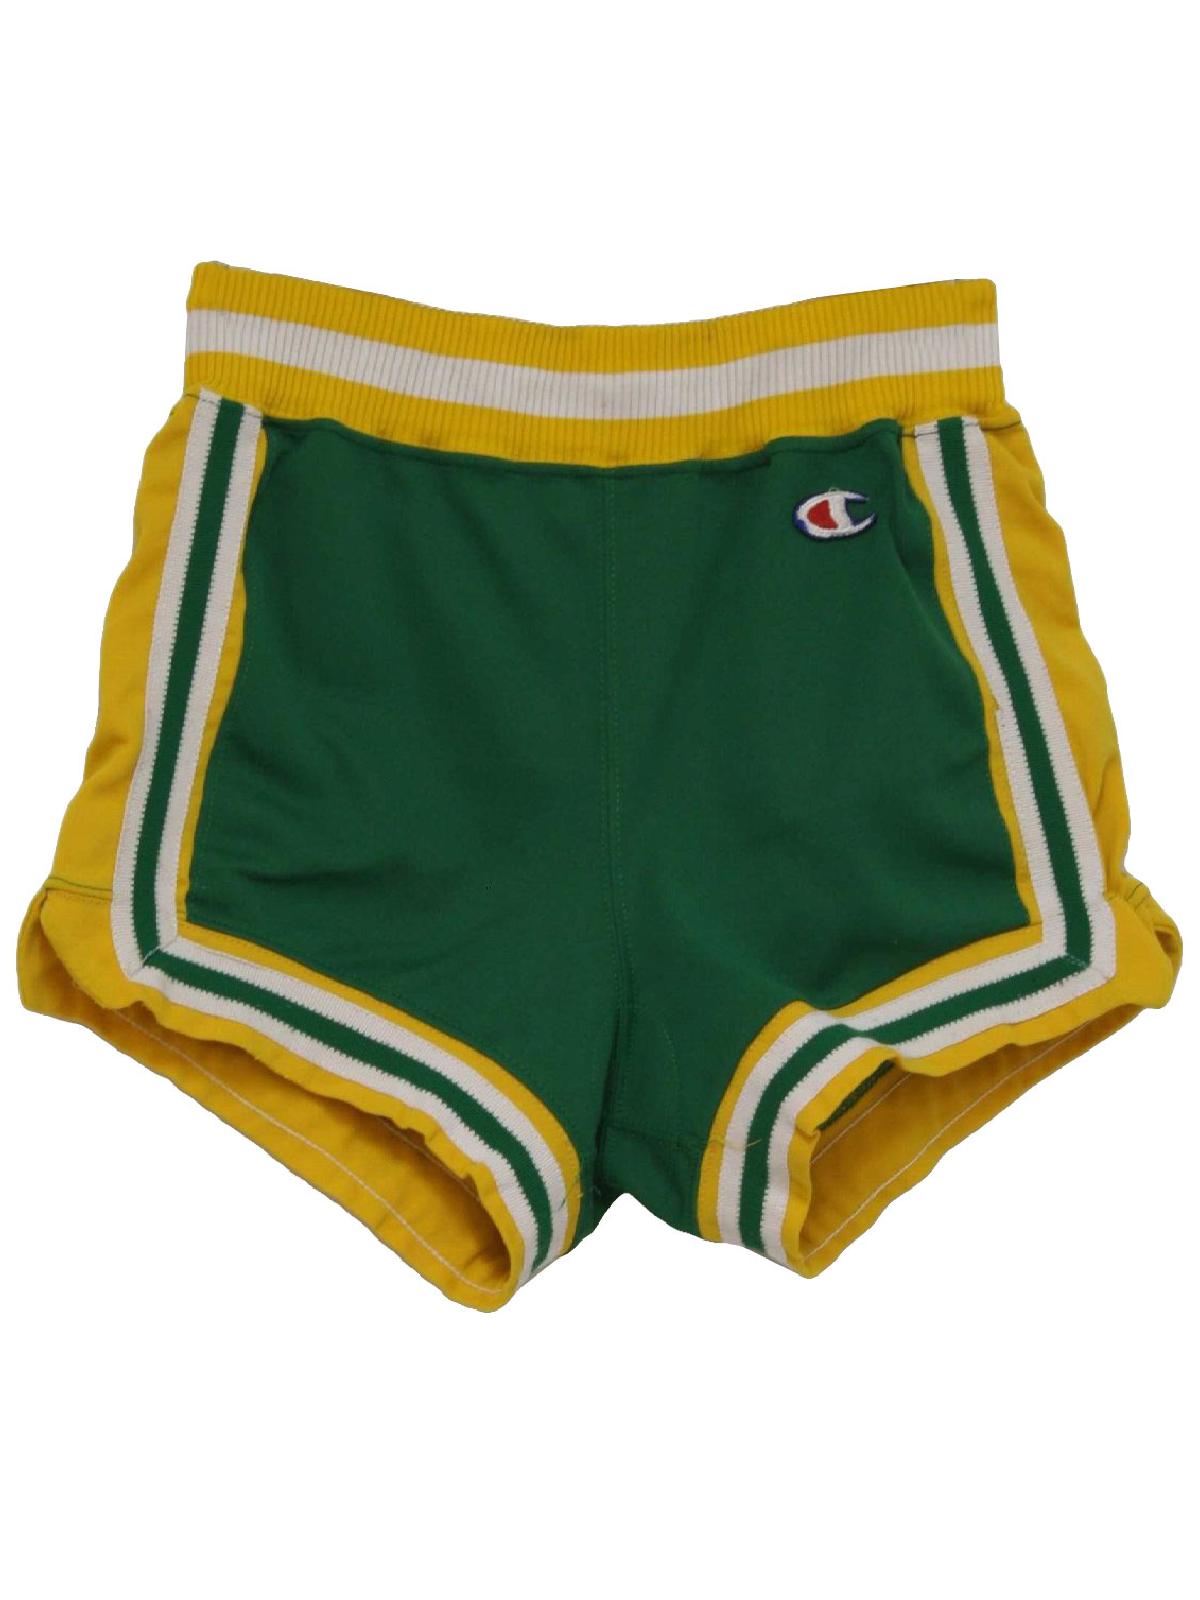 Champion 90's Vintage Shorts: 90s -Champion- Mens green, yellow and